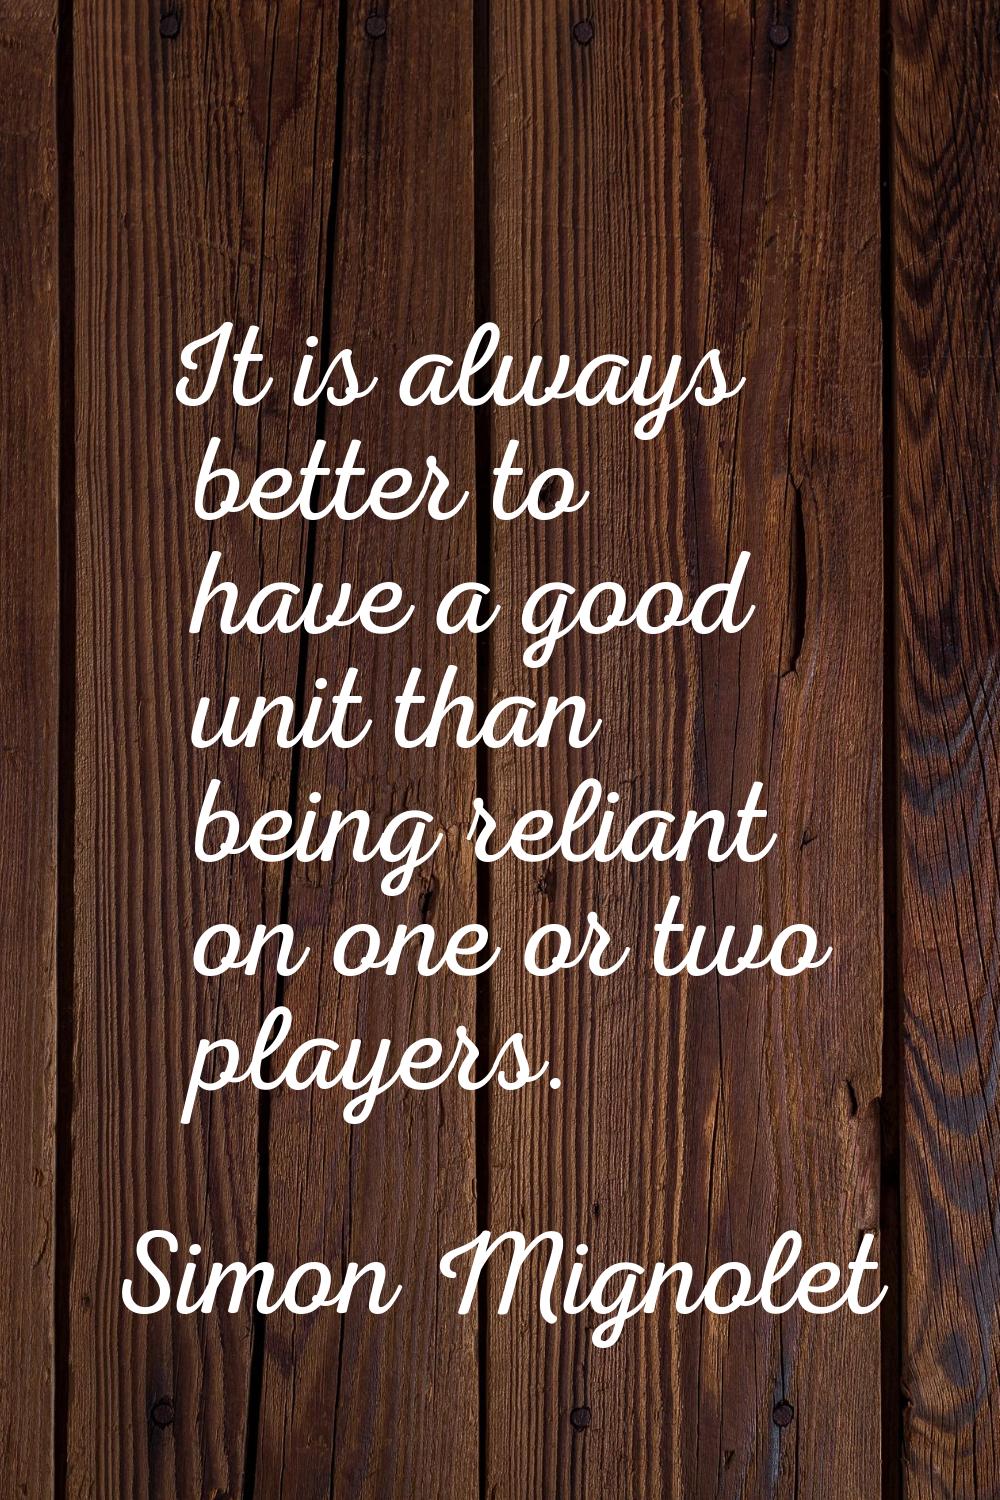 It is always better to have a good unit than being reliant on one or two players.